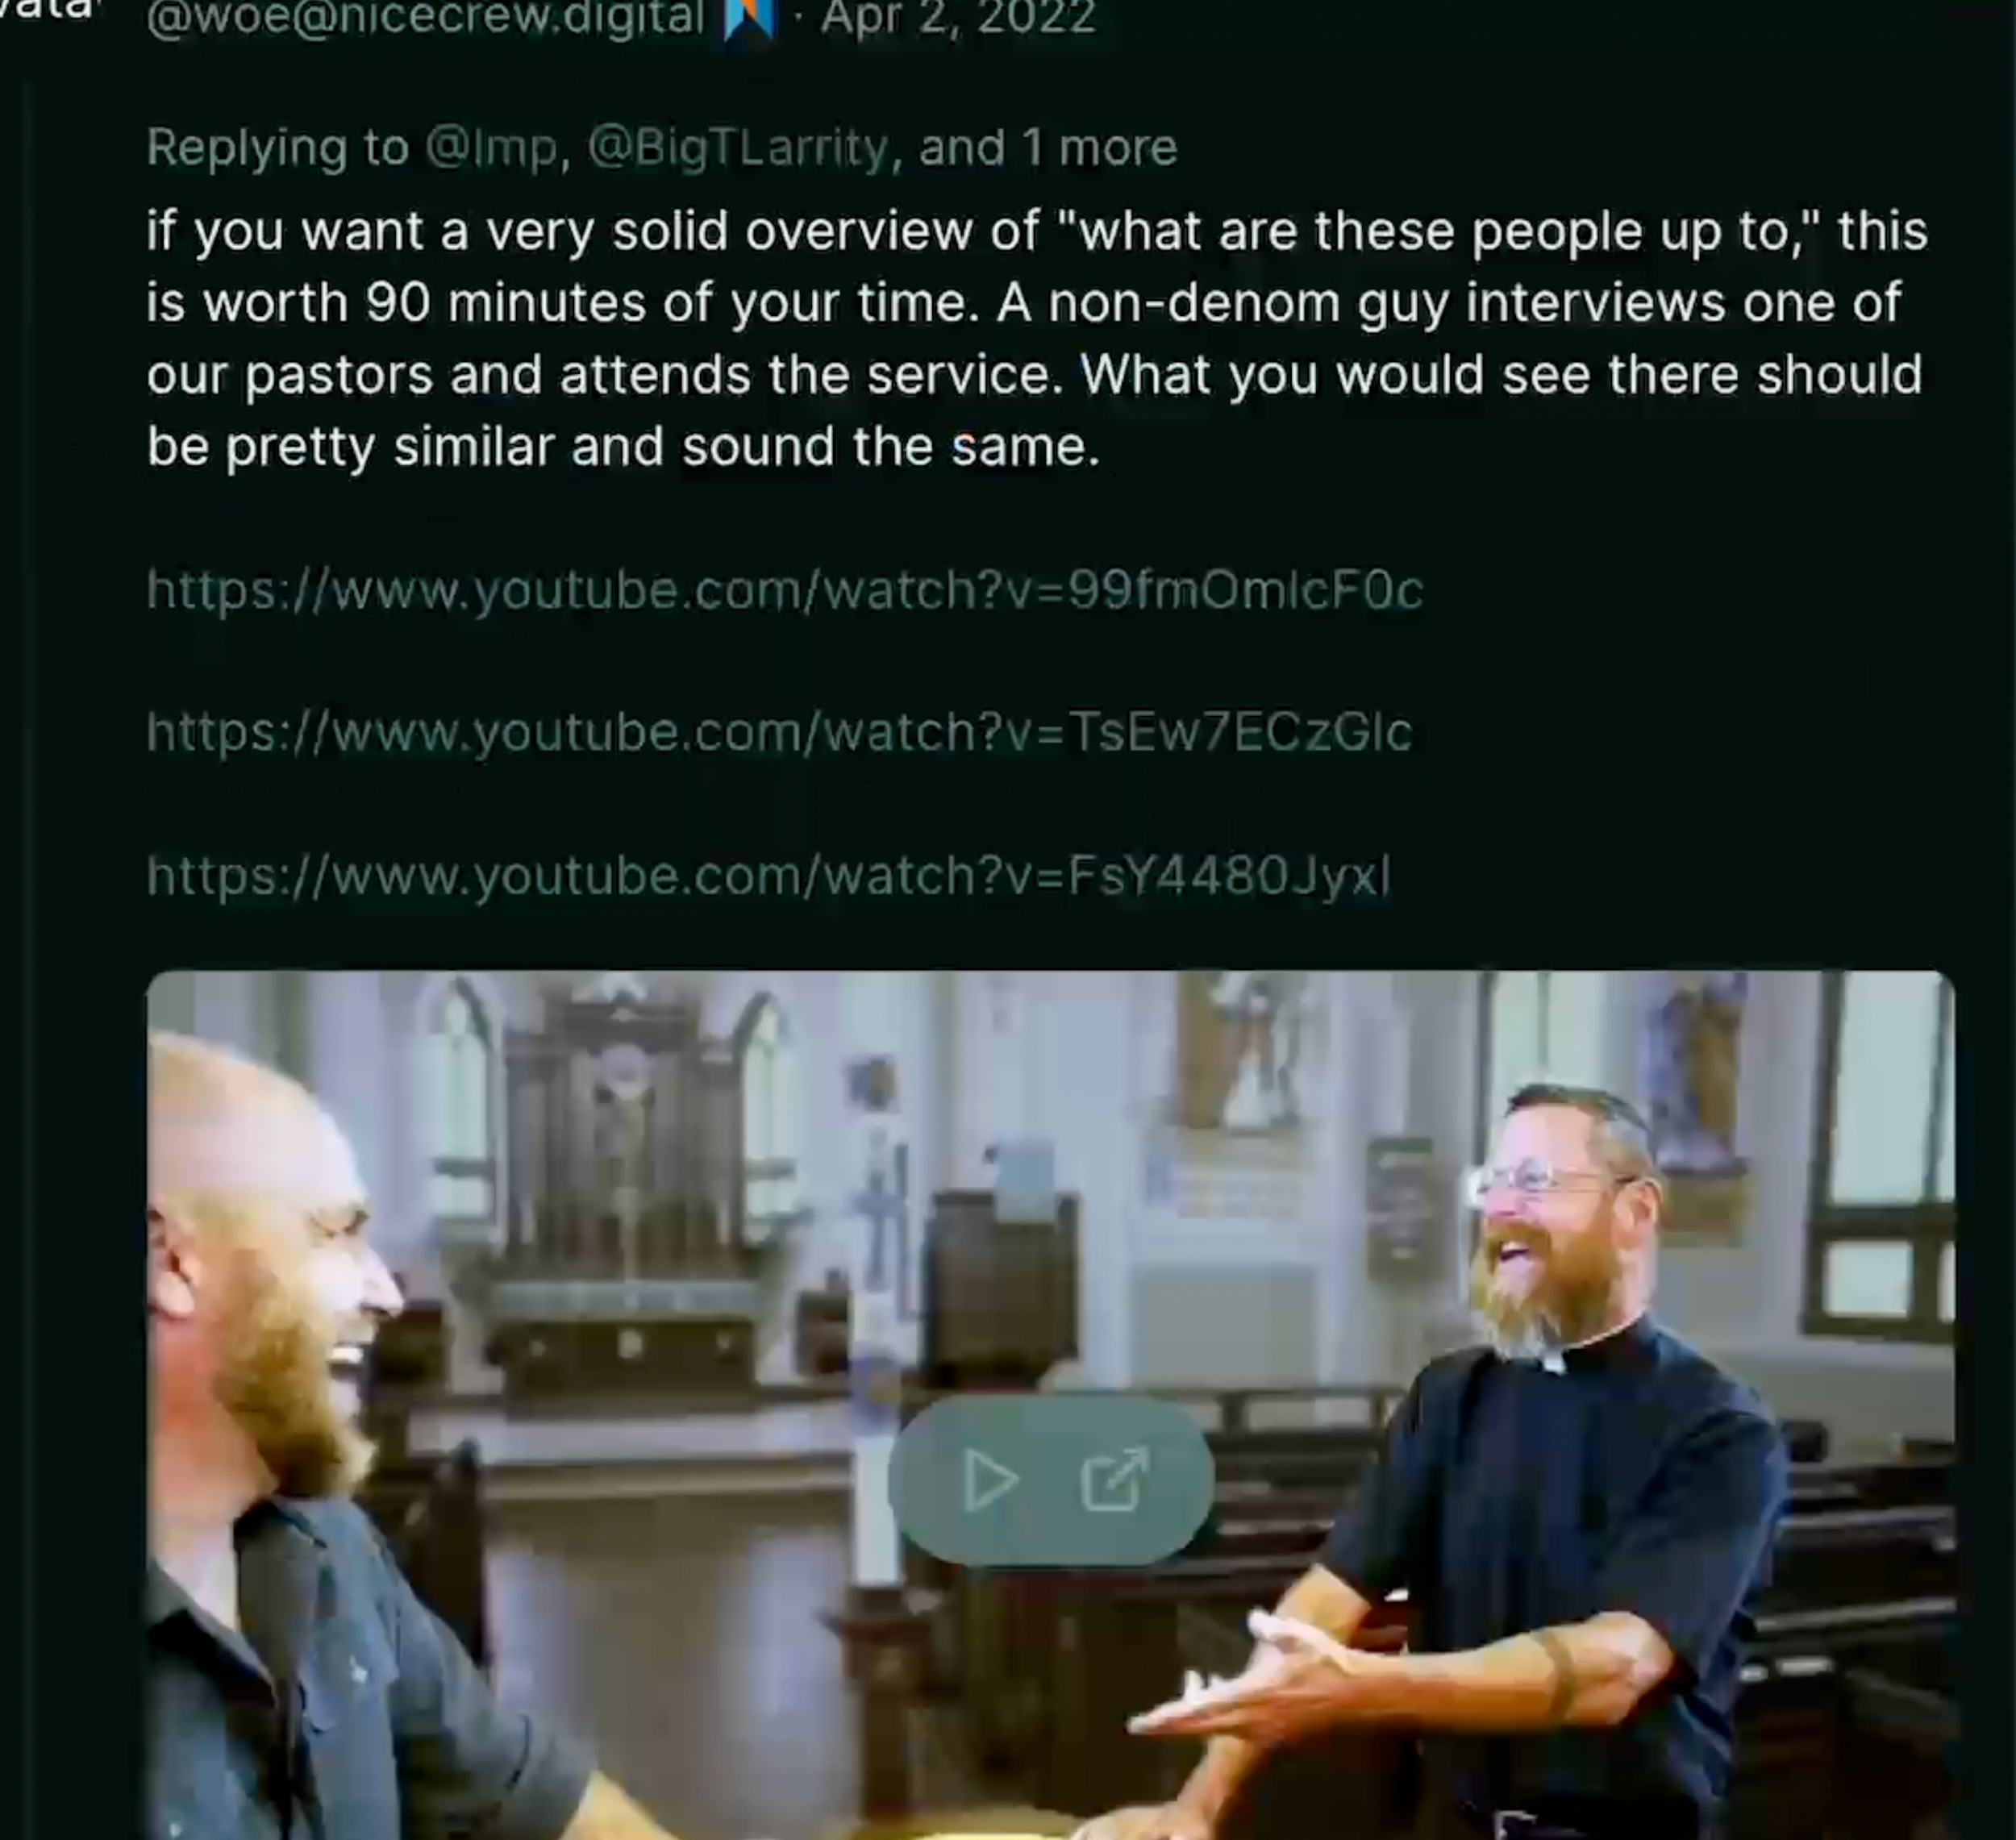 Dumperth on Poast: "If you want a very solid overview of 'what are these people up to,' this is worth 90 minutes of your time. A non-denom guy interviews one of our pastors and attends the service. What you would see there should be pretty similar and sound the same." Links to the Matt Whitman video he praised under the handle @eschatologuy.